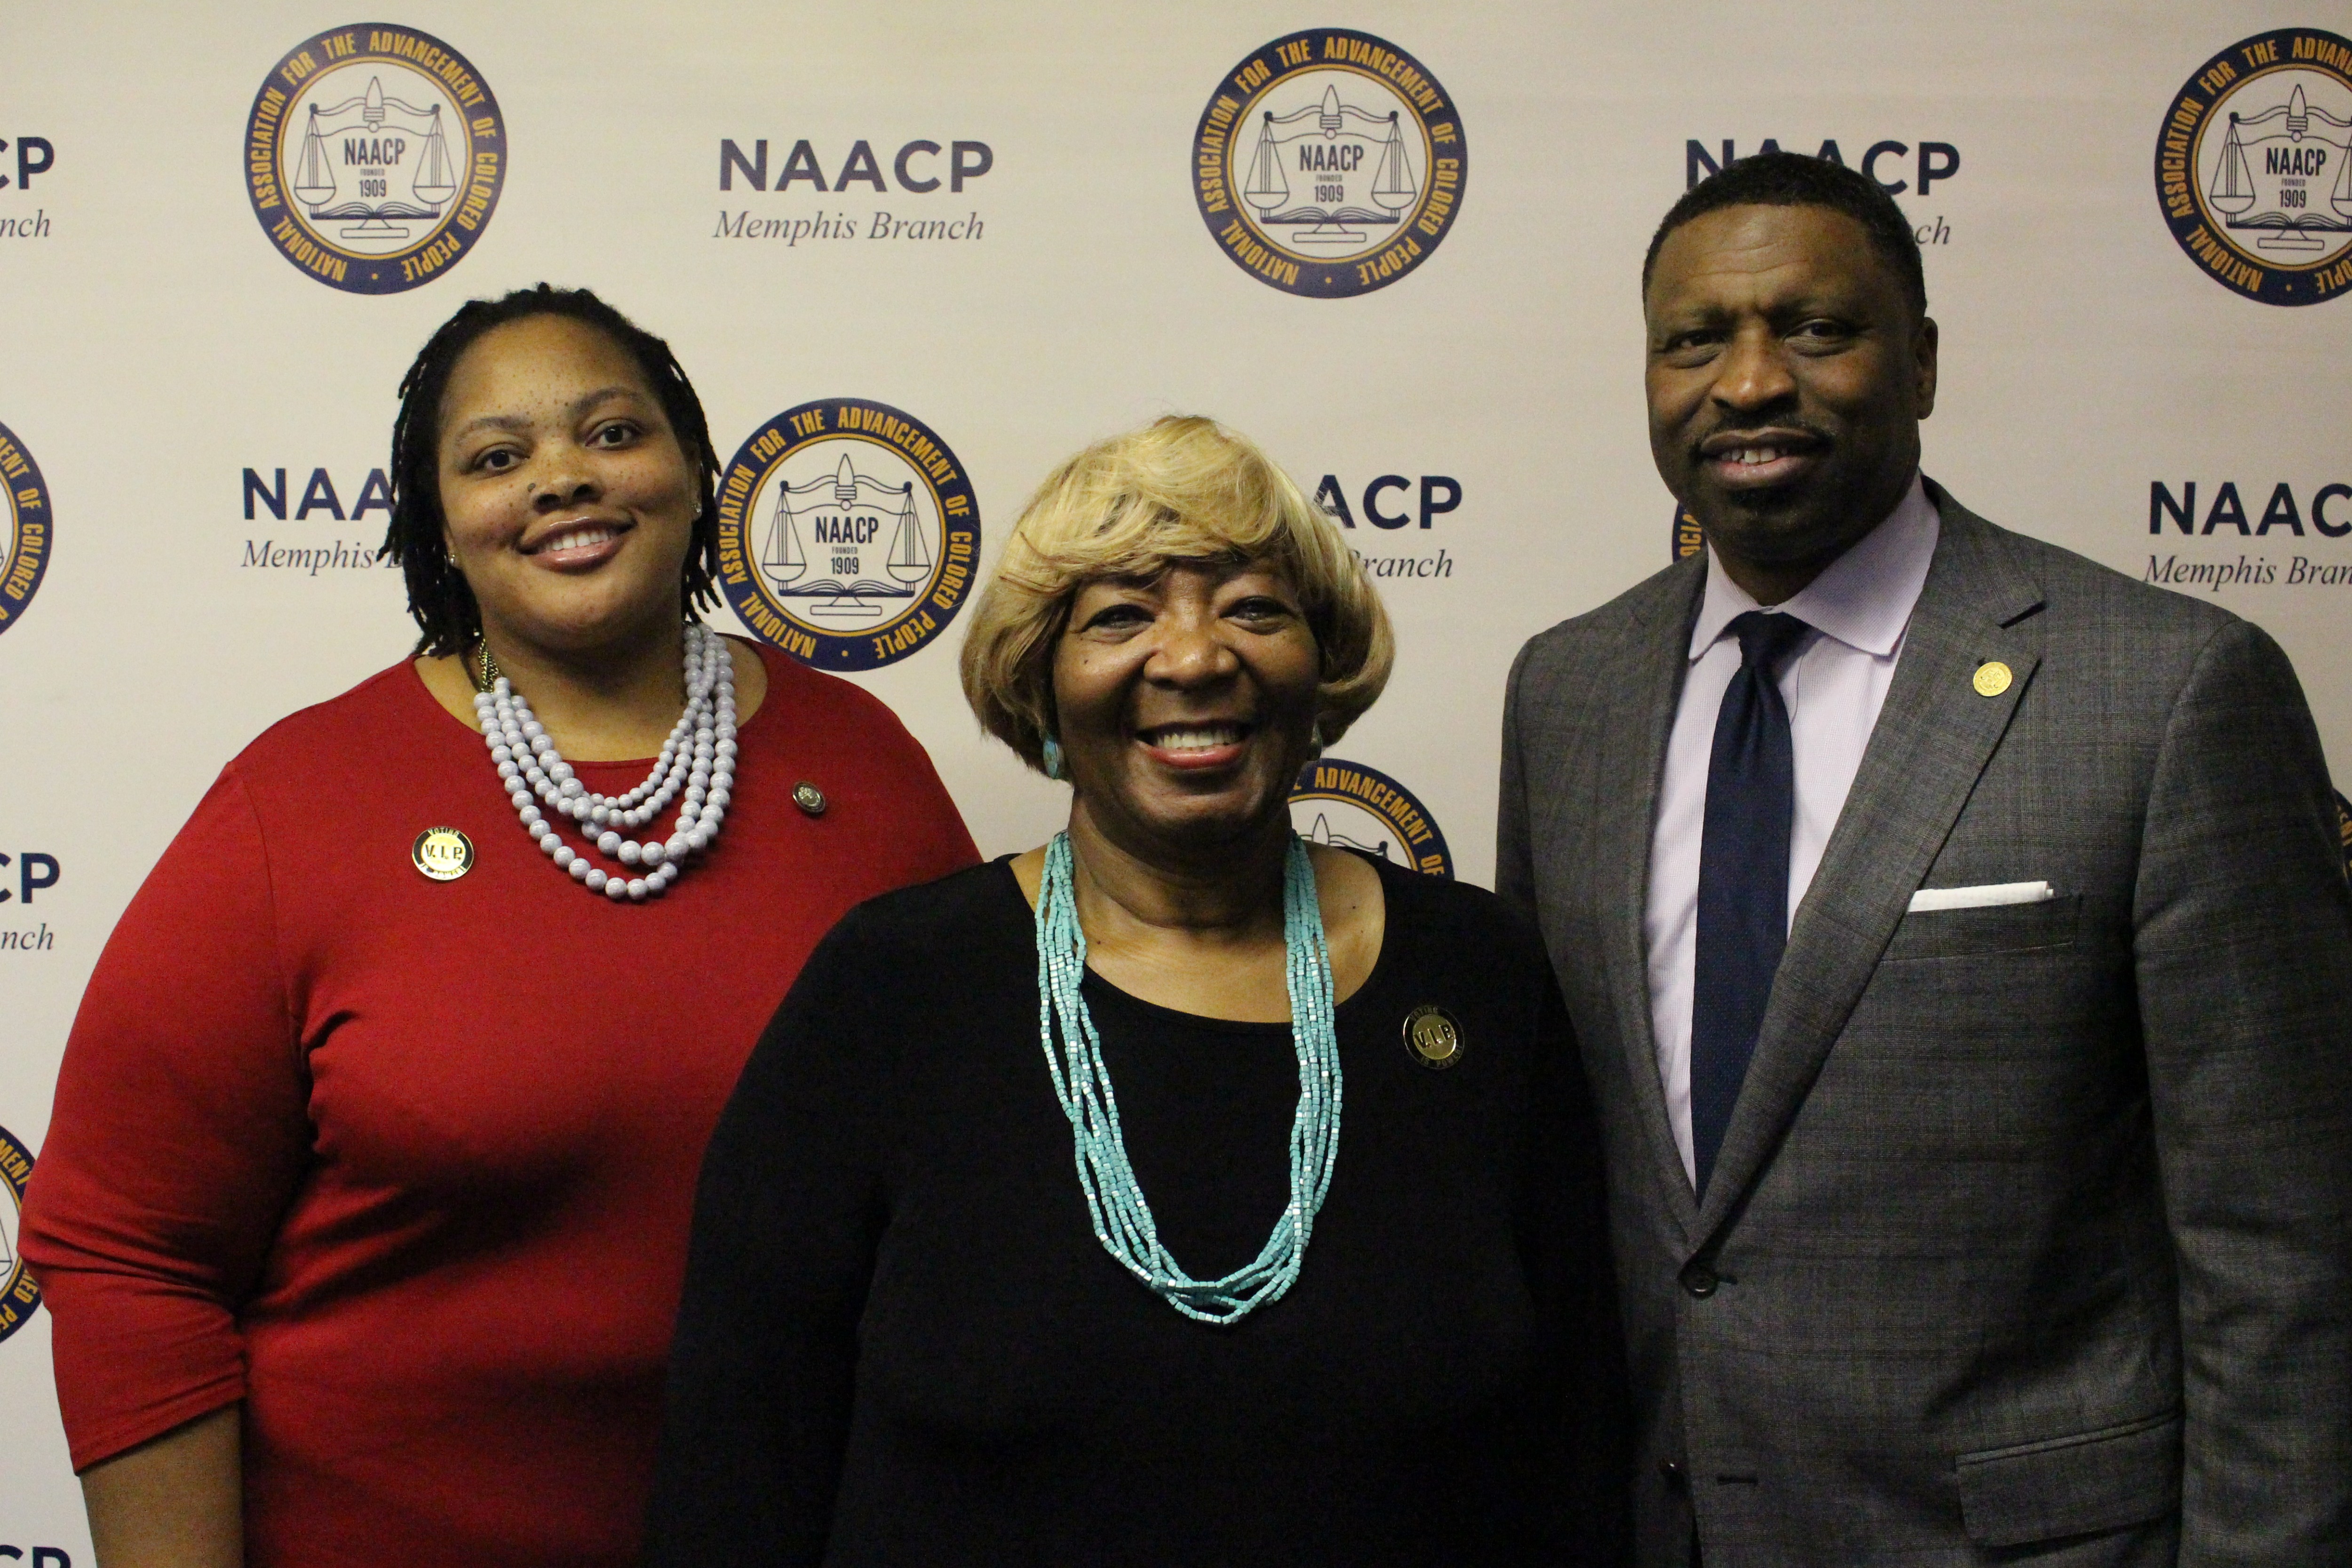 (L to R) County Commissioner Tami Sawyer, Tennessee’s NAACP president, Gloria Sweet-Love, and national NAACP president, Derrick Johnson, at the Oct 26 NAACP press conference. (Melonee Gaines)